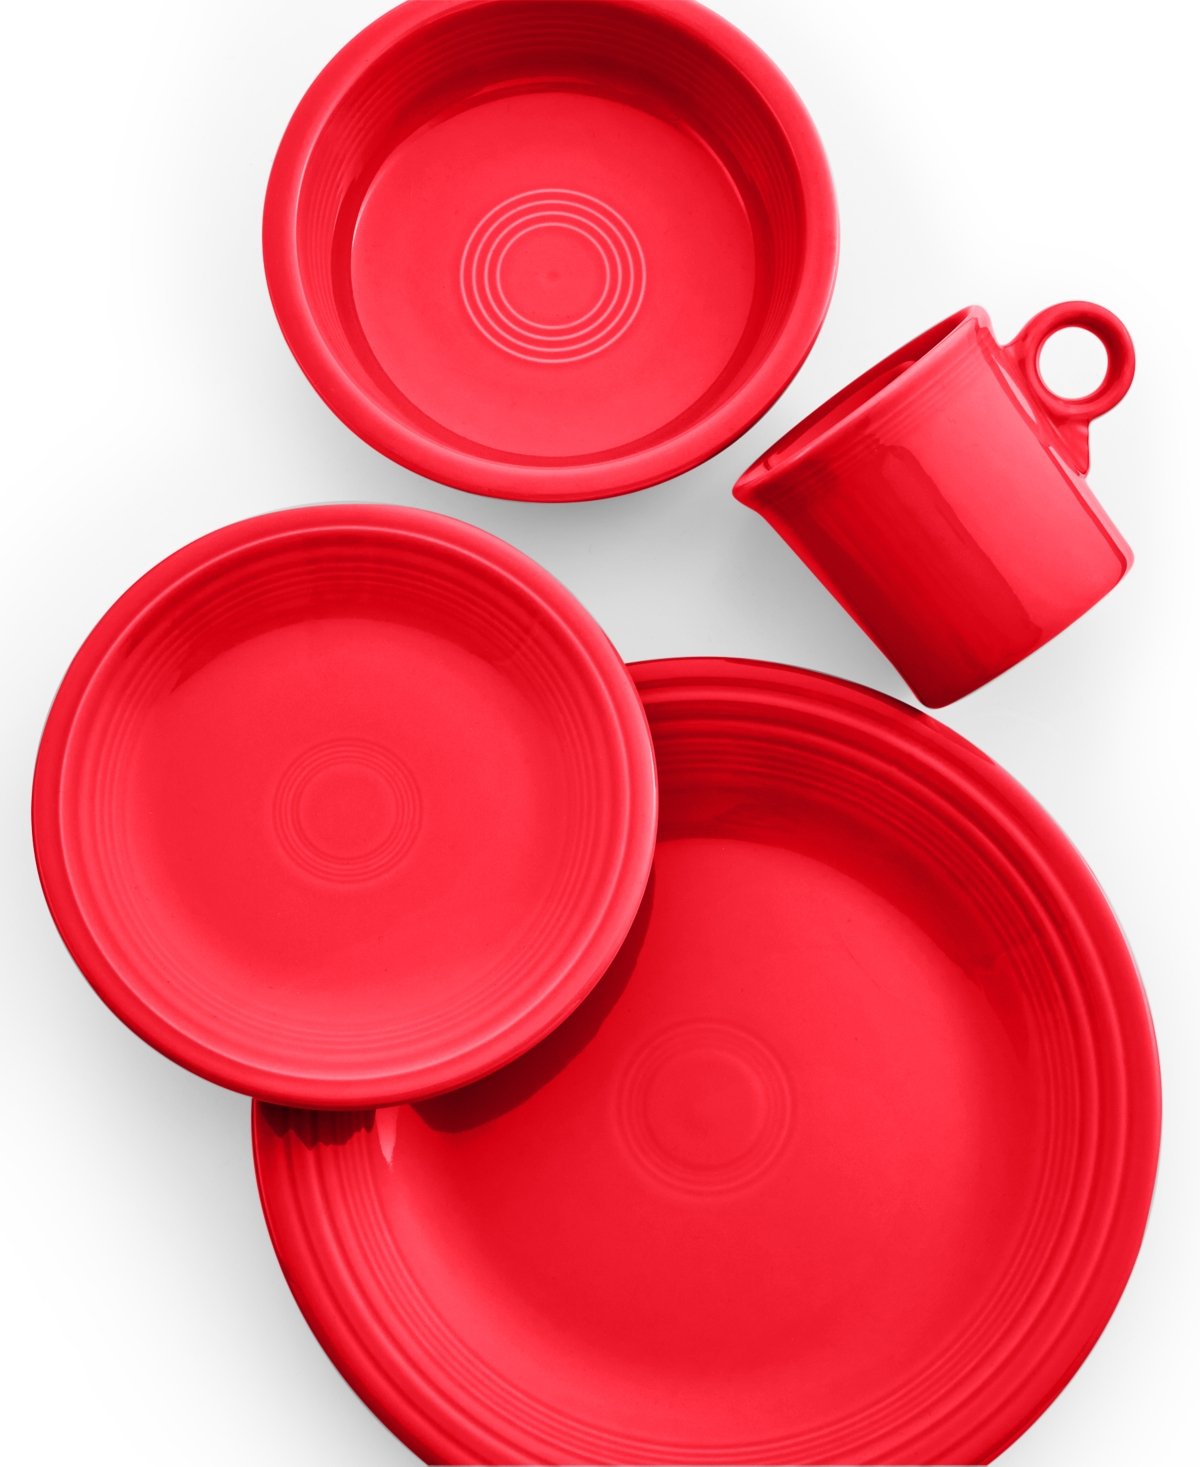 4-Piece Place Setting - Scarlet